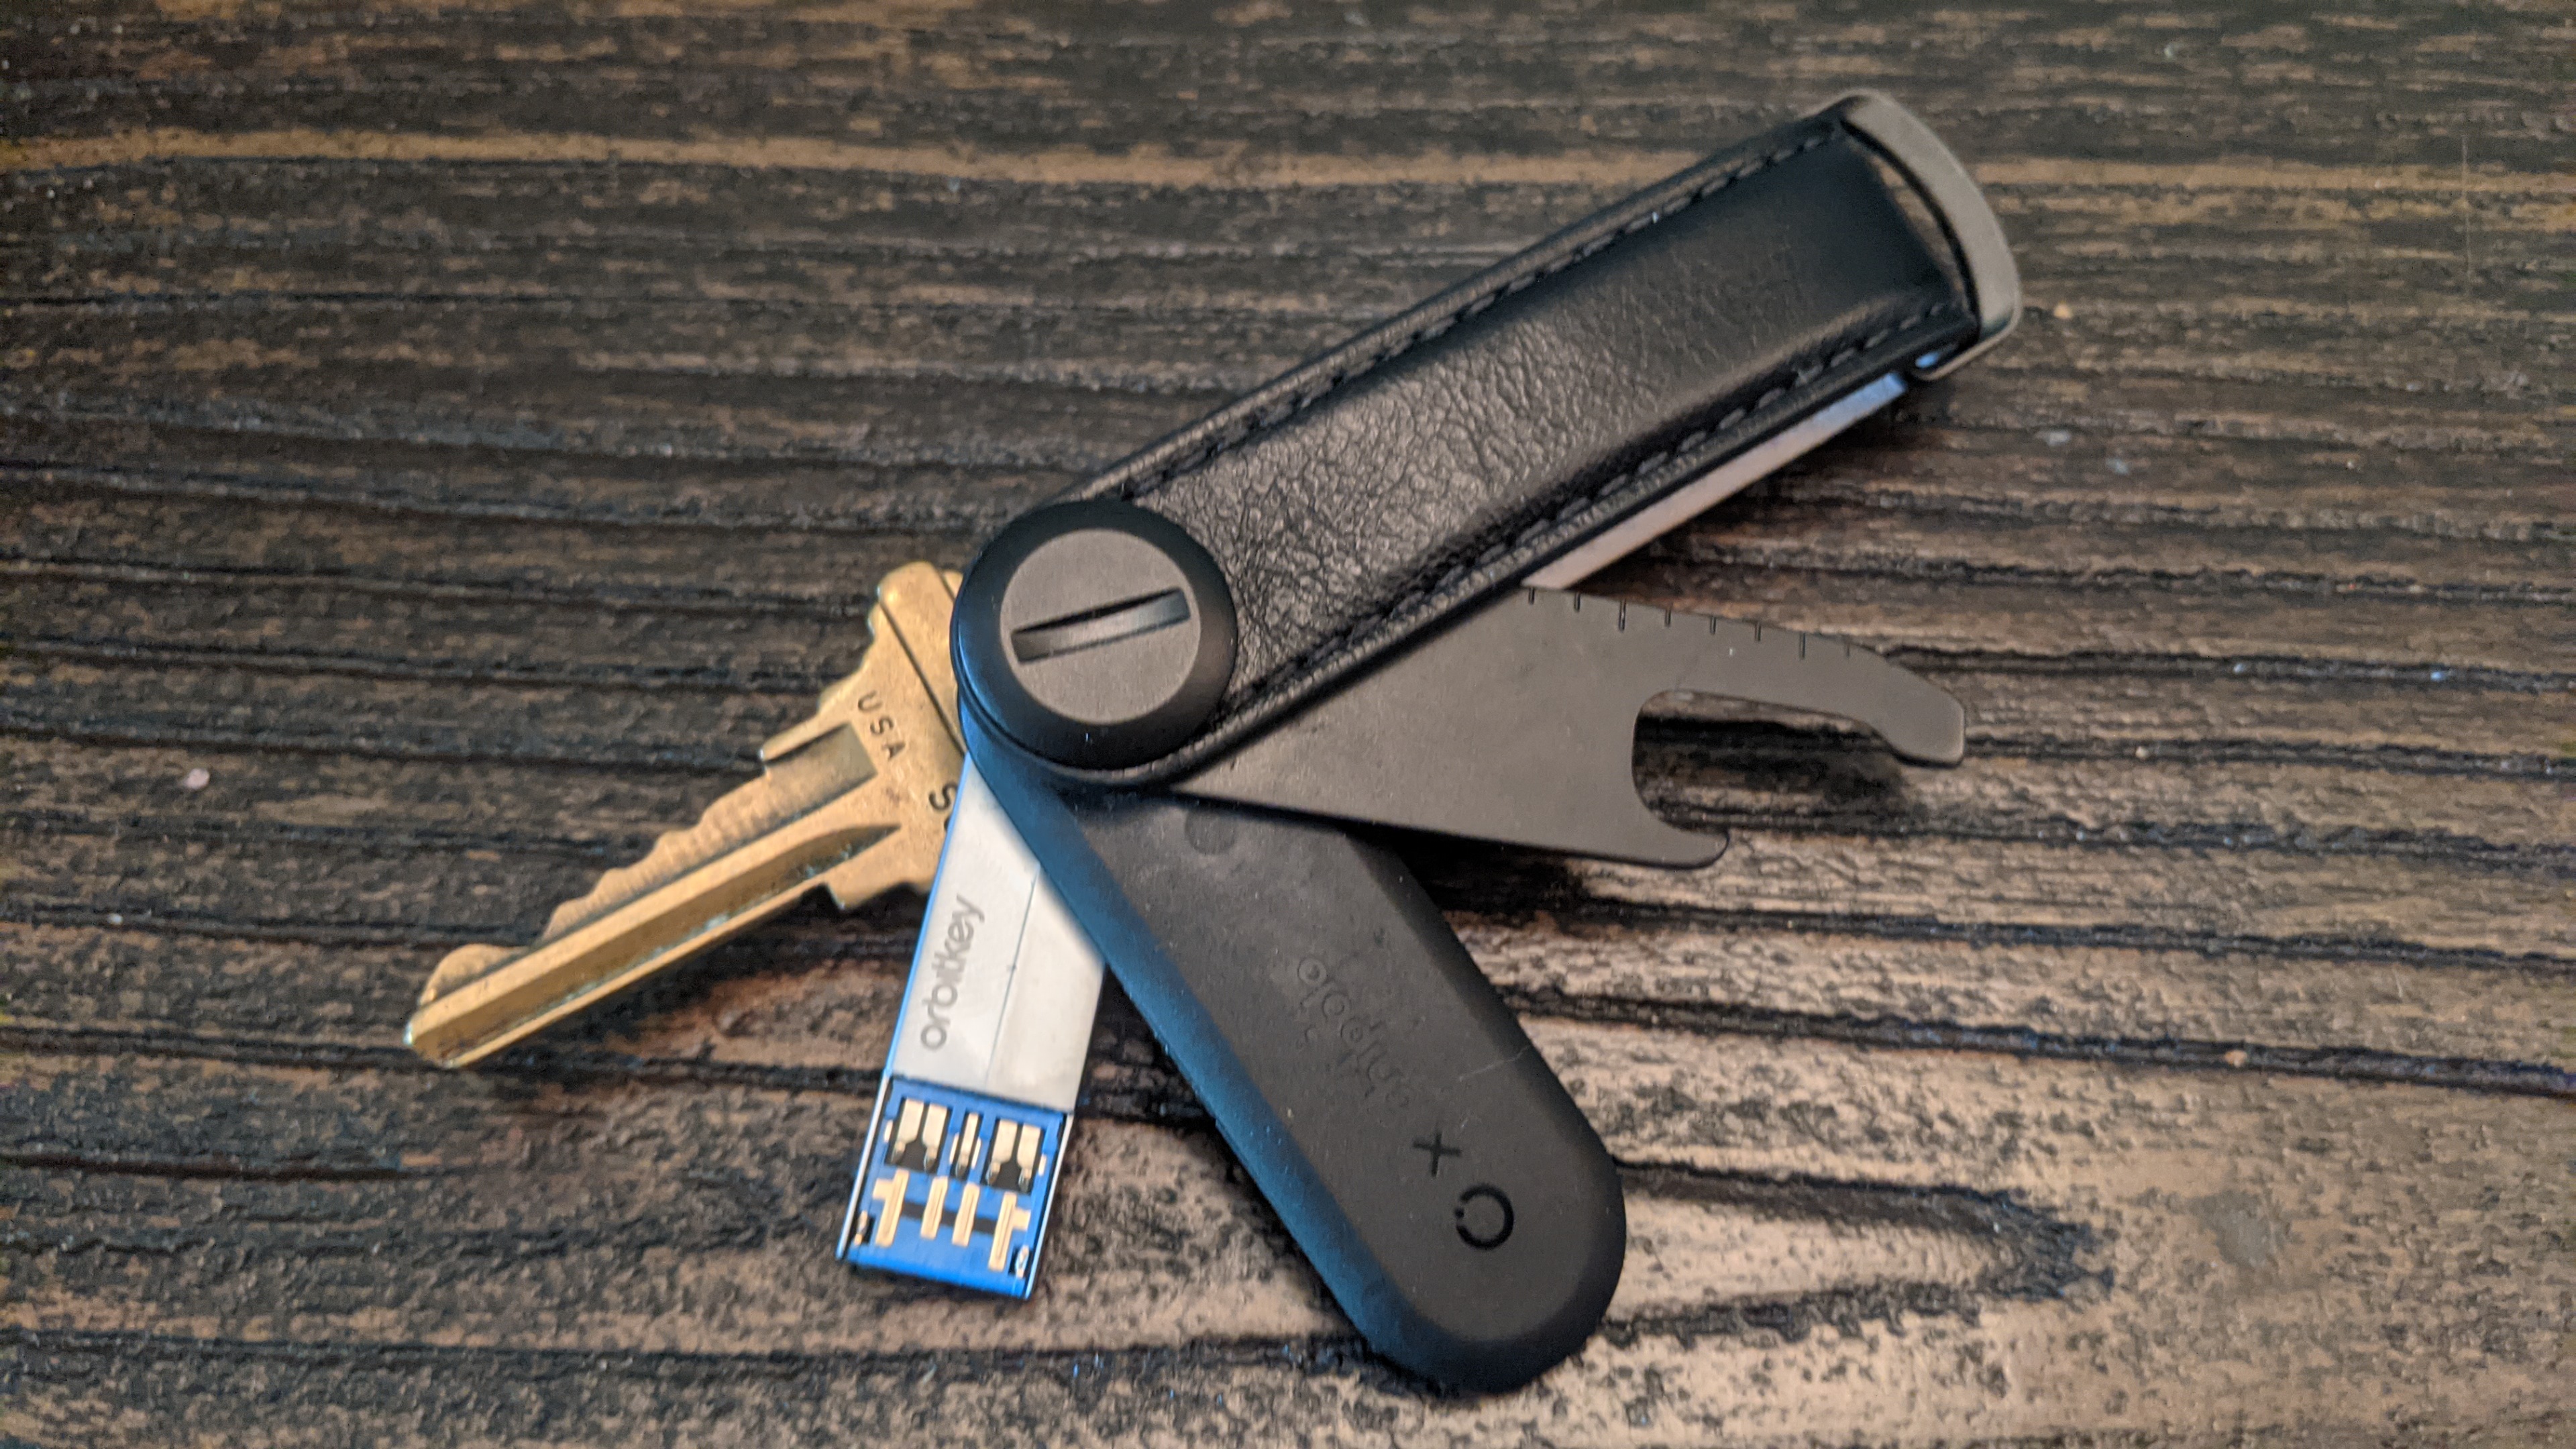 Orbitkey Review: Clever Everyday Carry Combines Keys, Tech and Tools